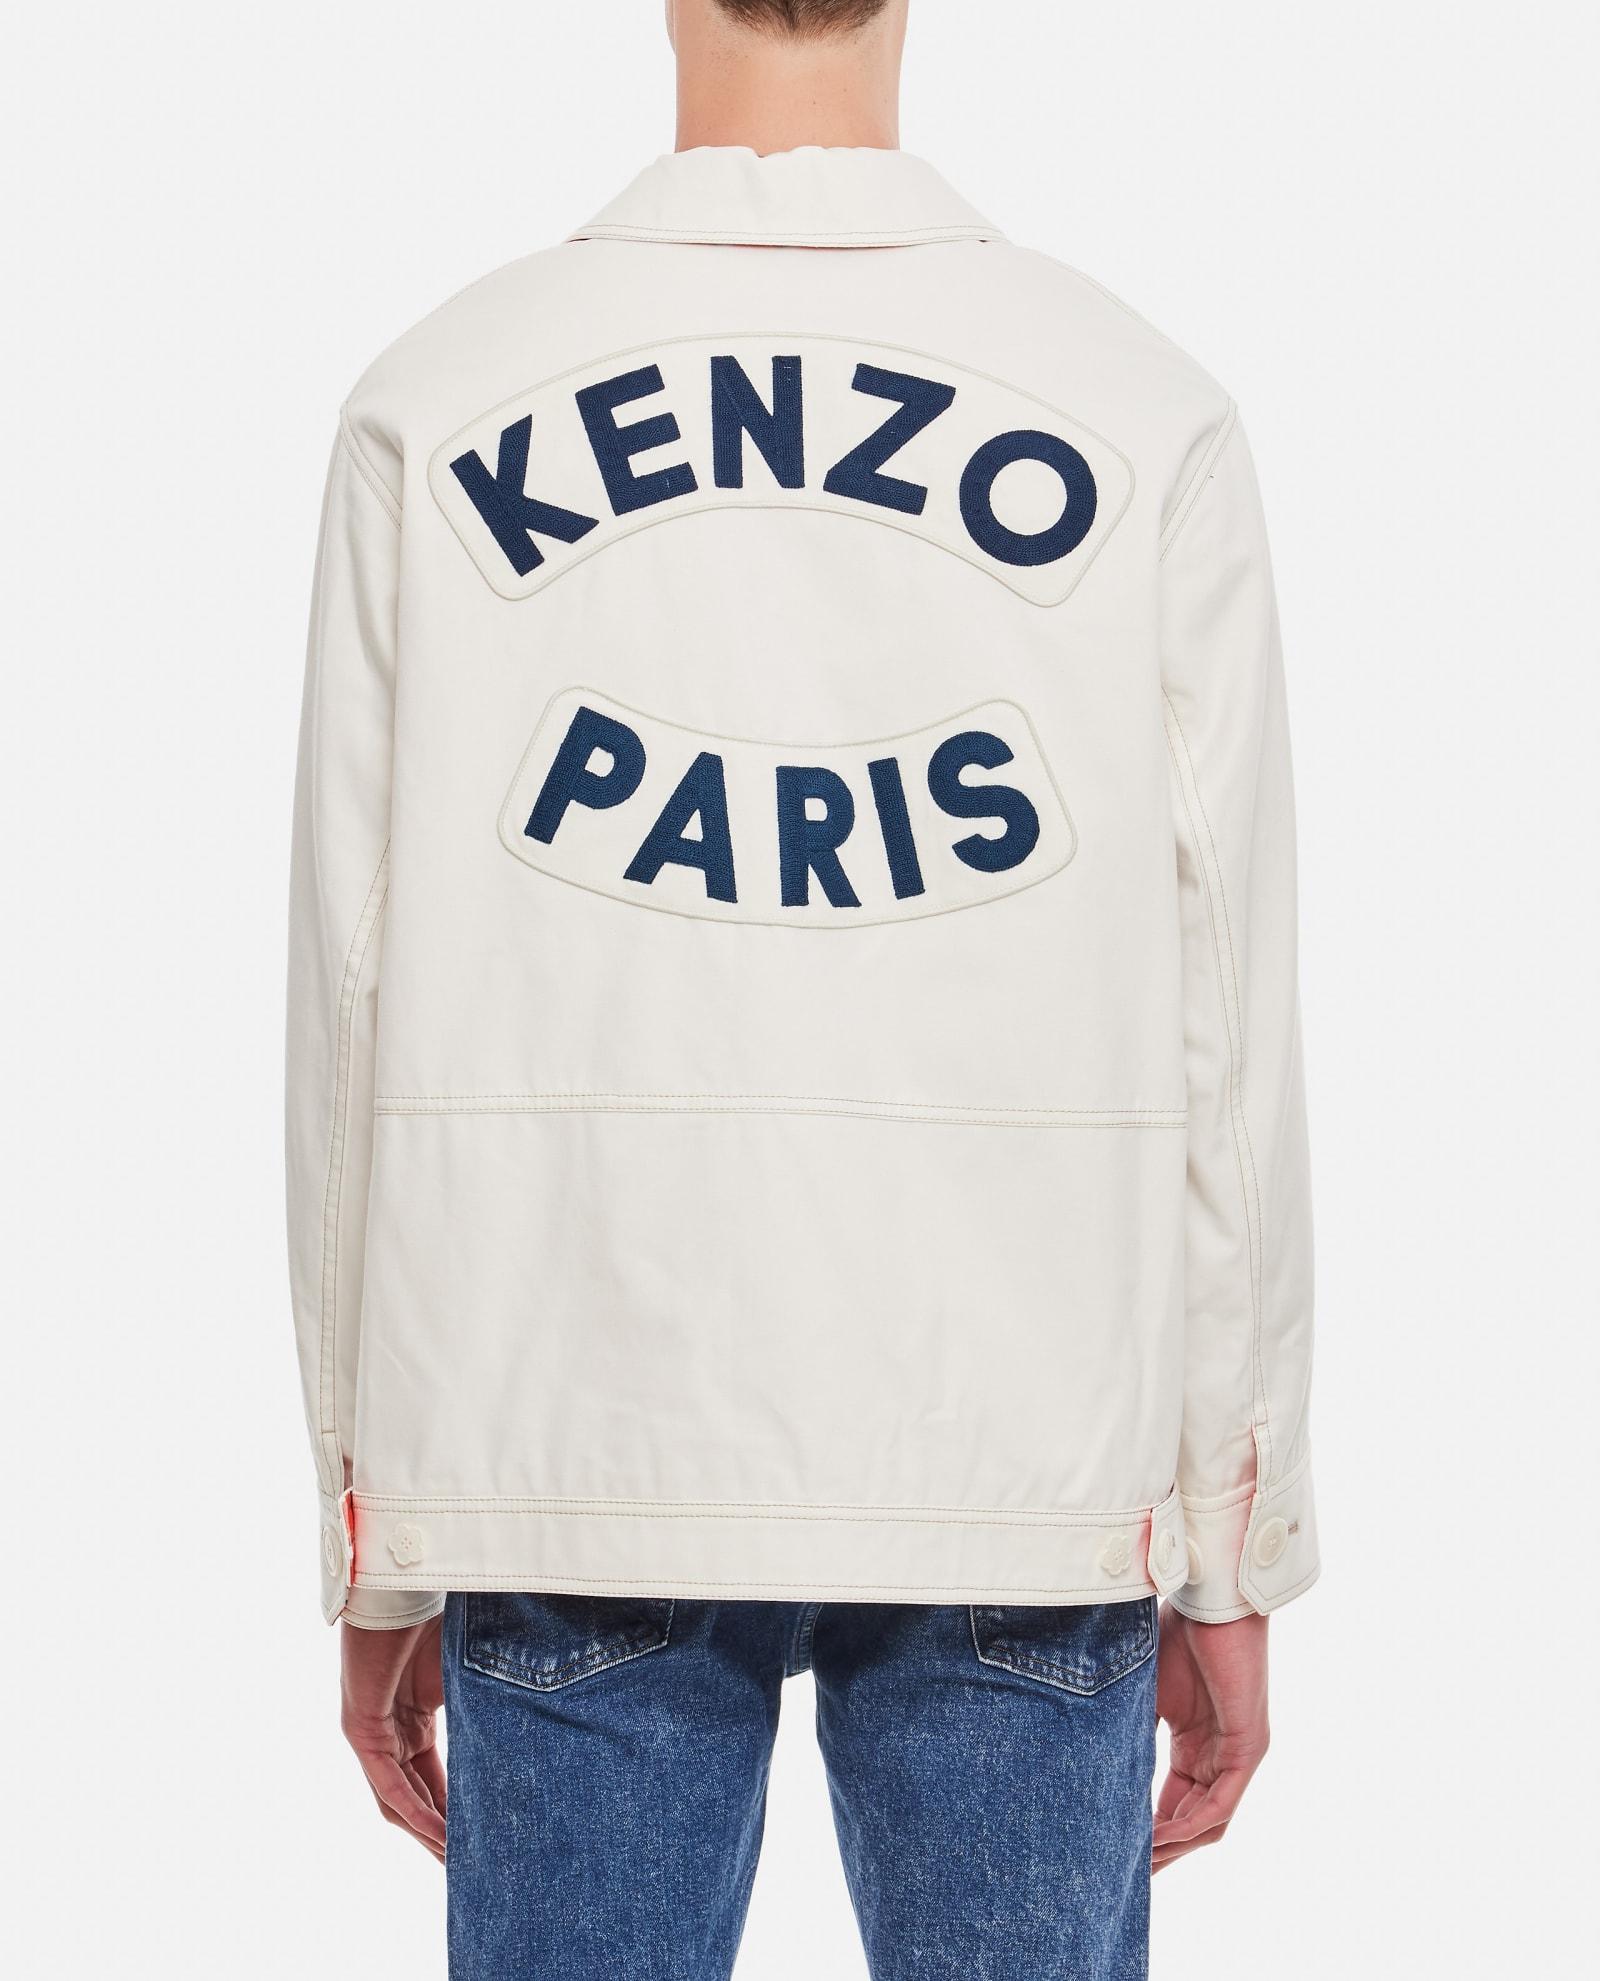 KENZO Workwear Jacket With Badges in White for Men | Lyst